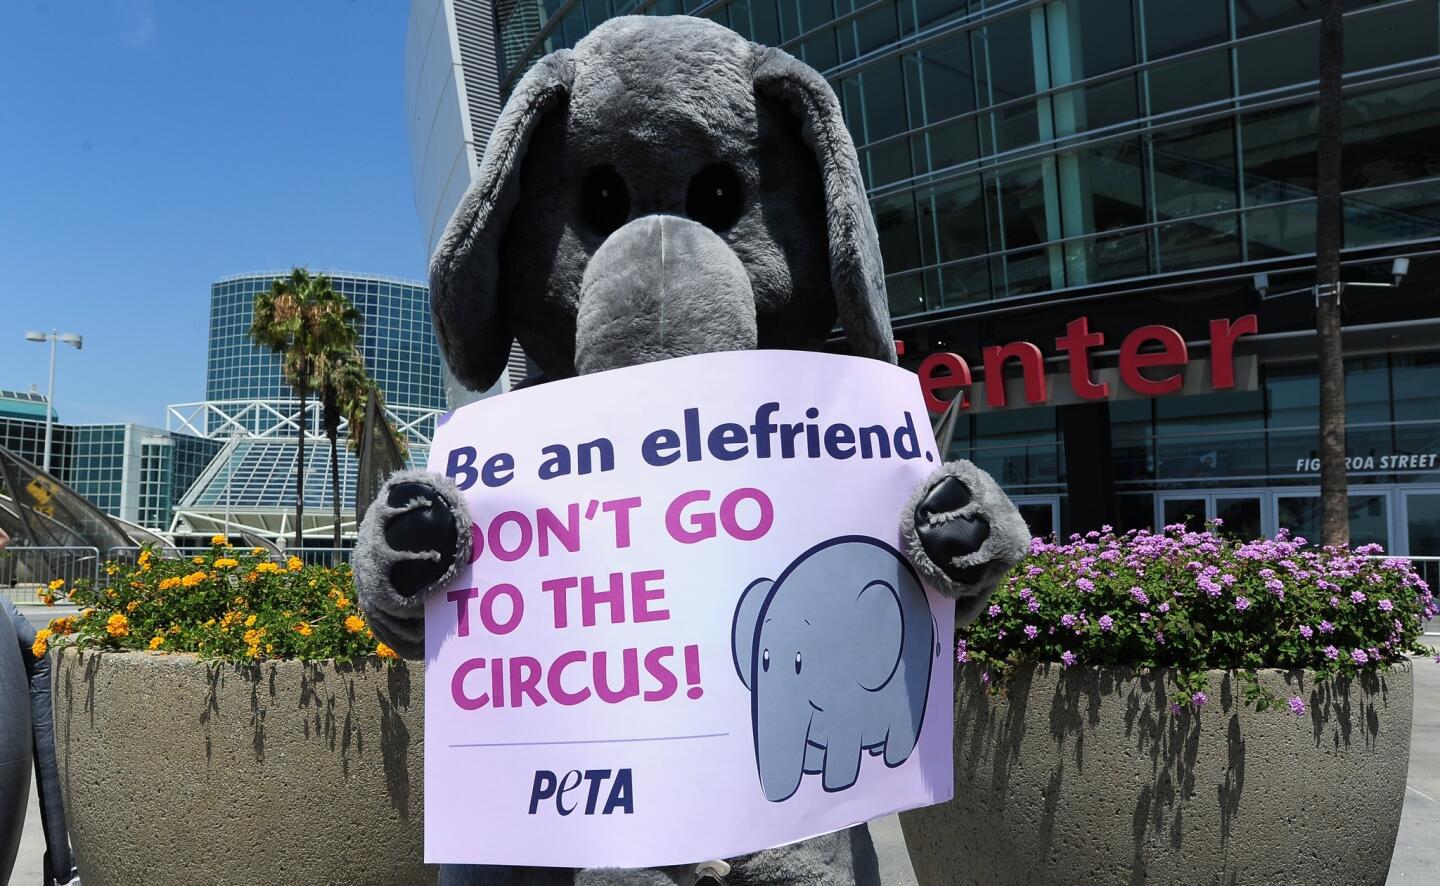 An animal rights activist in an elephant costume holds a placard during a protest in front of the Staples Center in Los Angeles, on July 11, 2012 in California, on the opening day of the Ringling Bros. and Barnum & Bailey Circus.